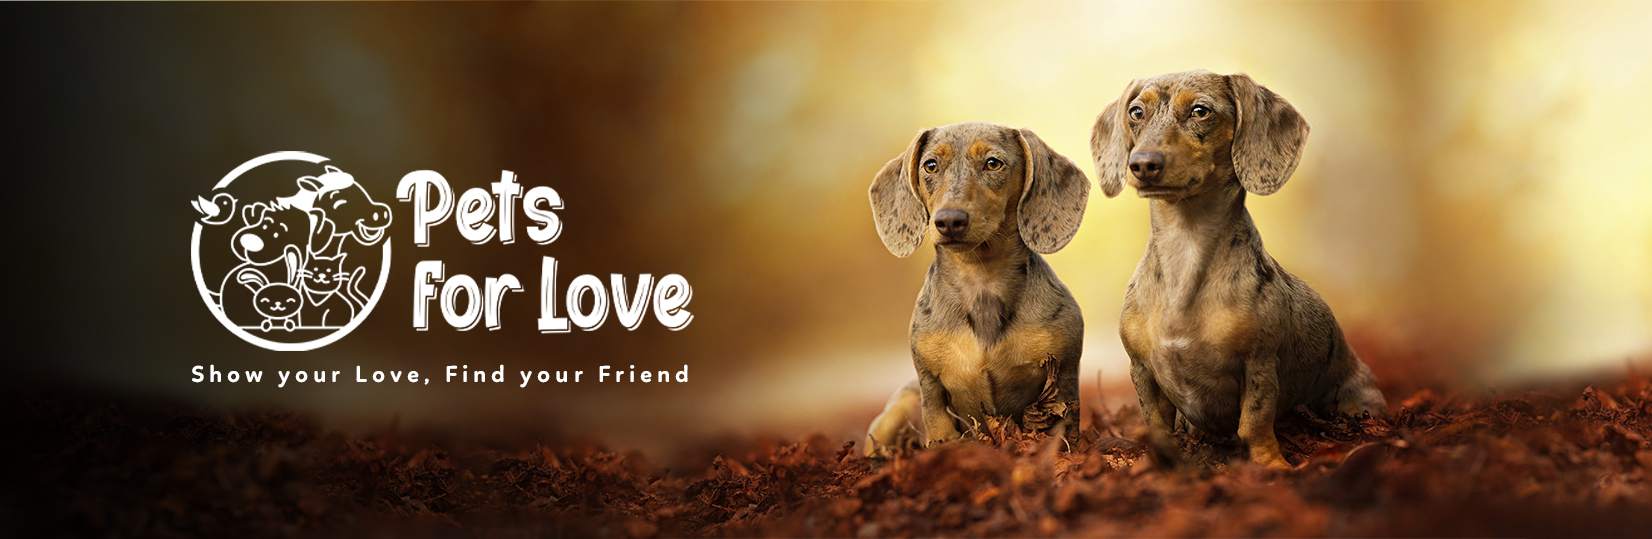 pets for love uk